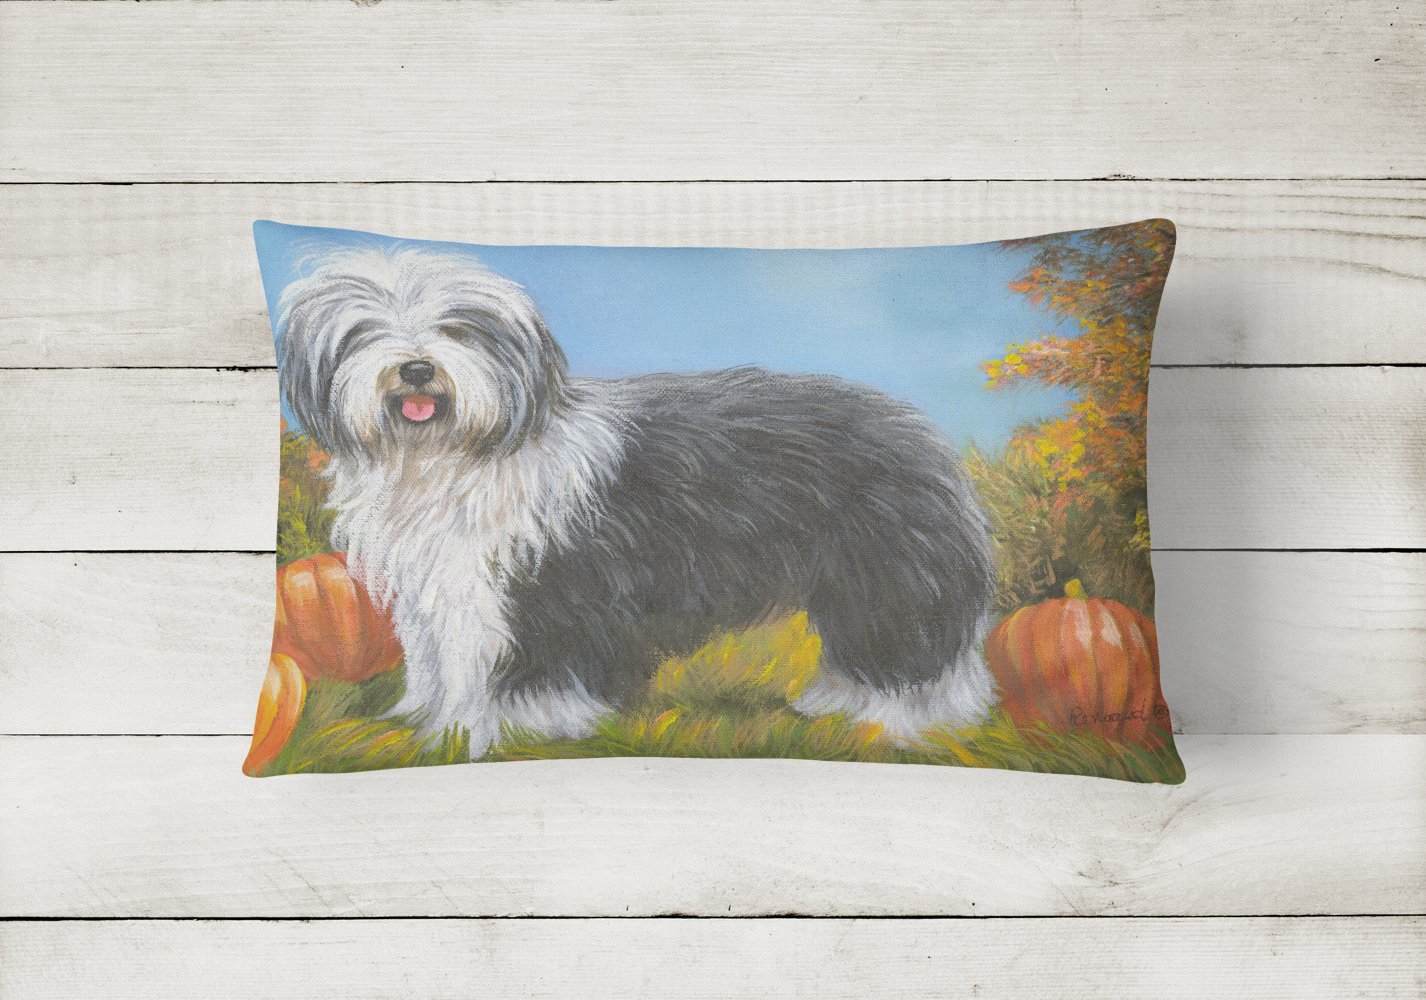 Buy this Old English Sheepdog Ocotoberfest Canvas Fabric Decorative Pillow PPP3265PW1216